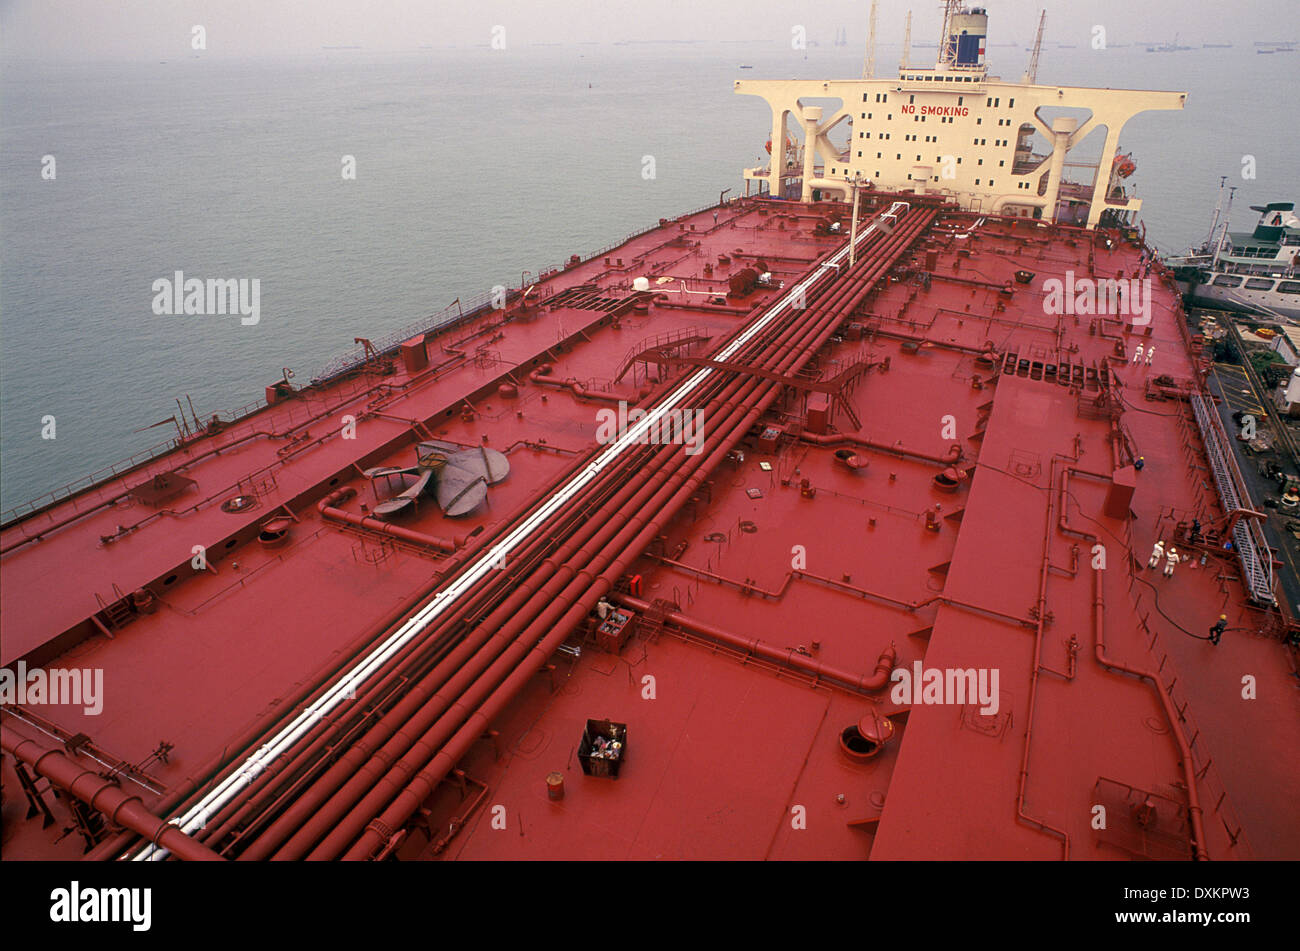 Deck of world's largest oil tanker Stock Photo